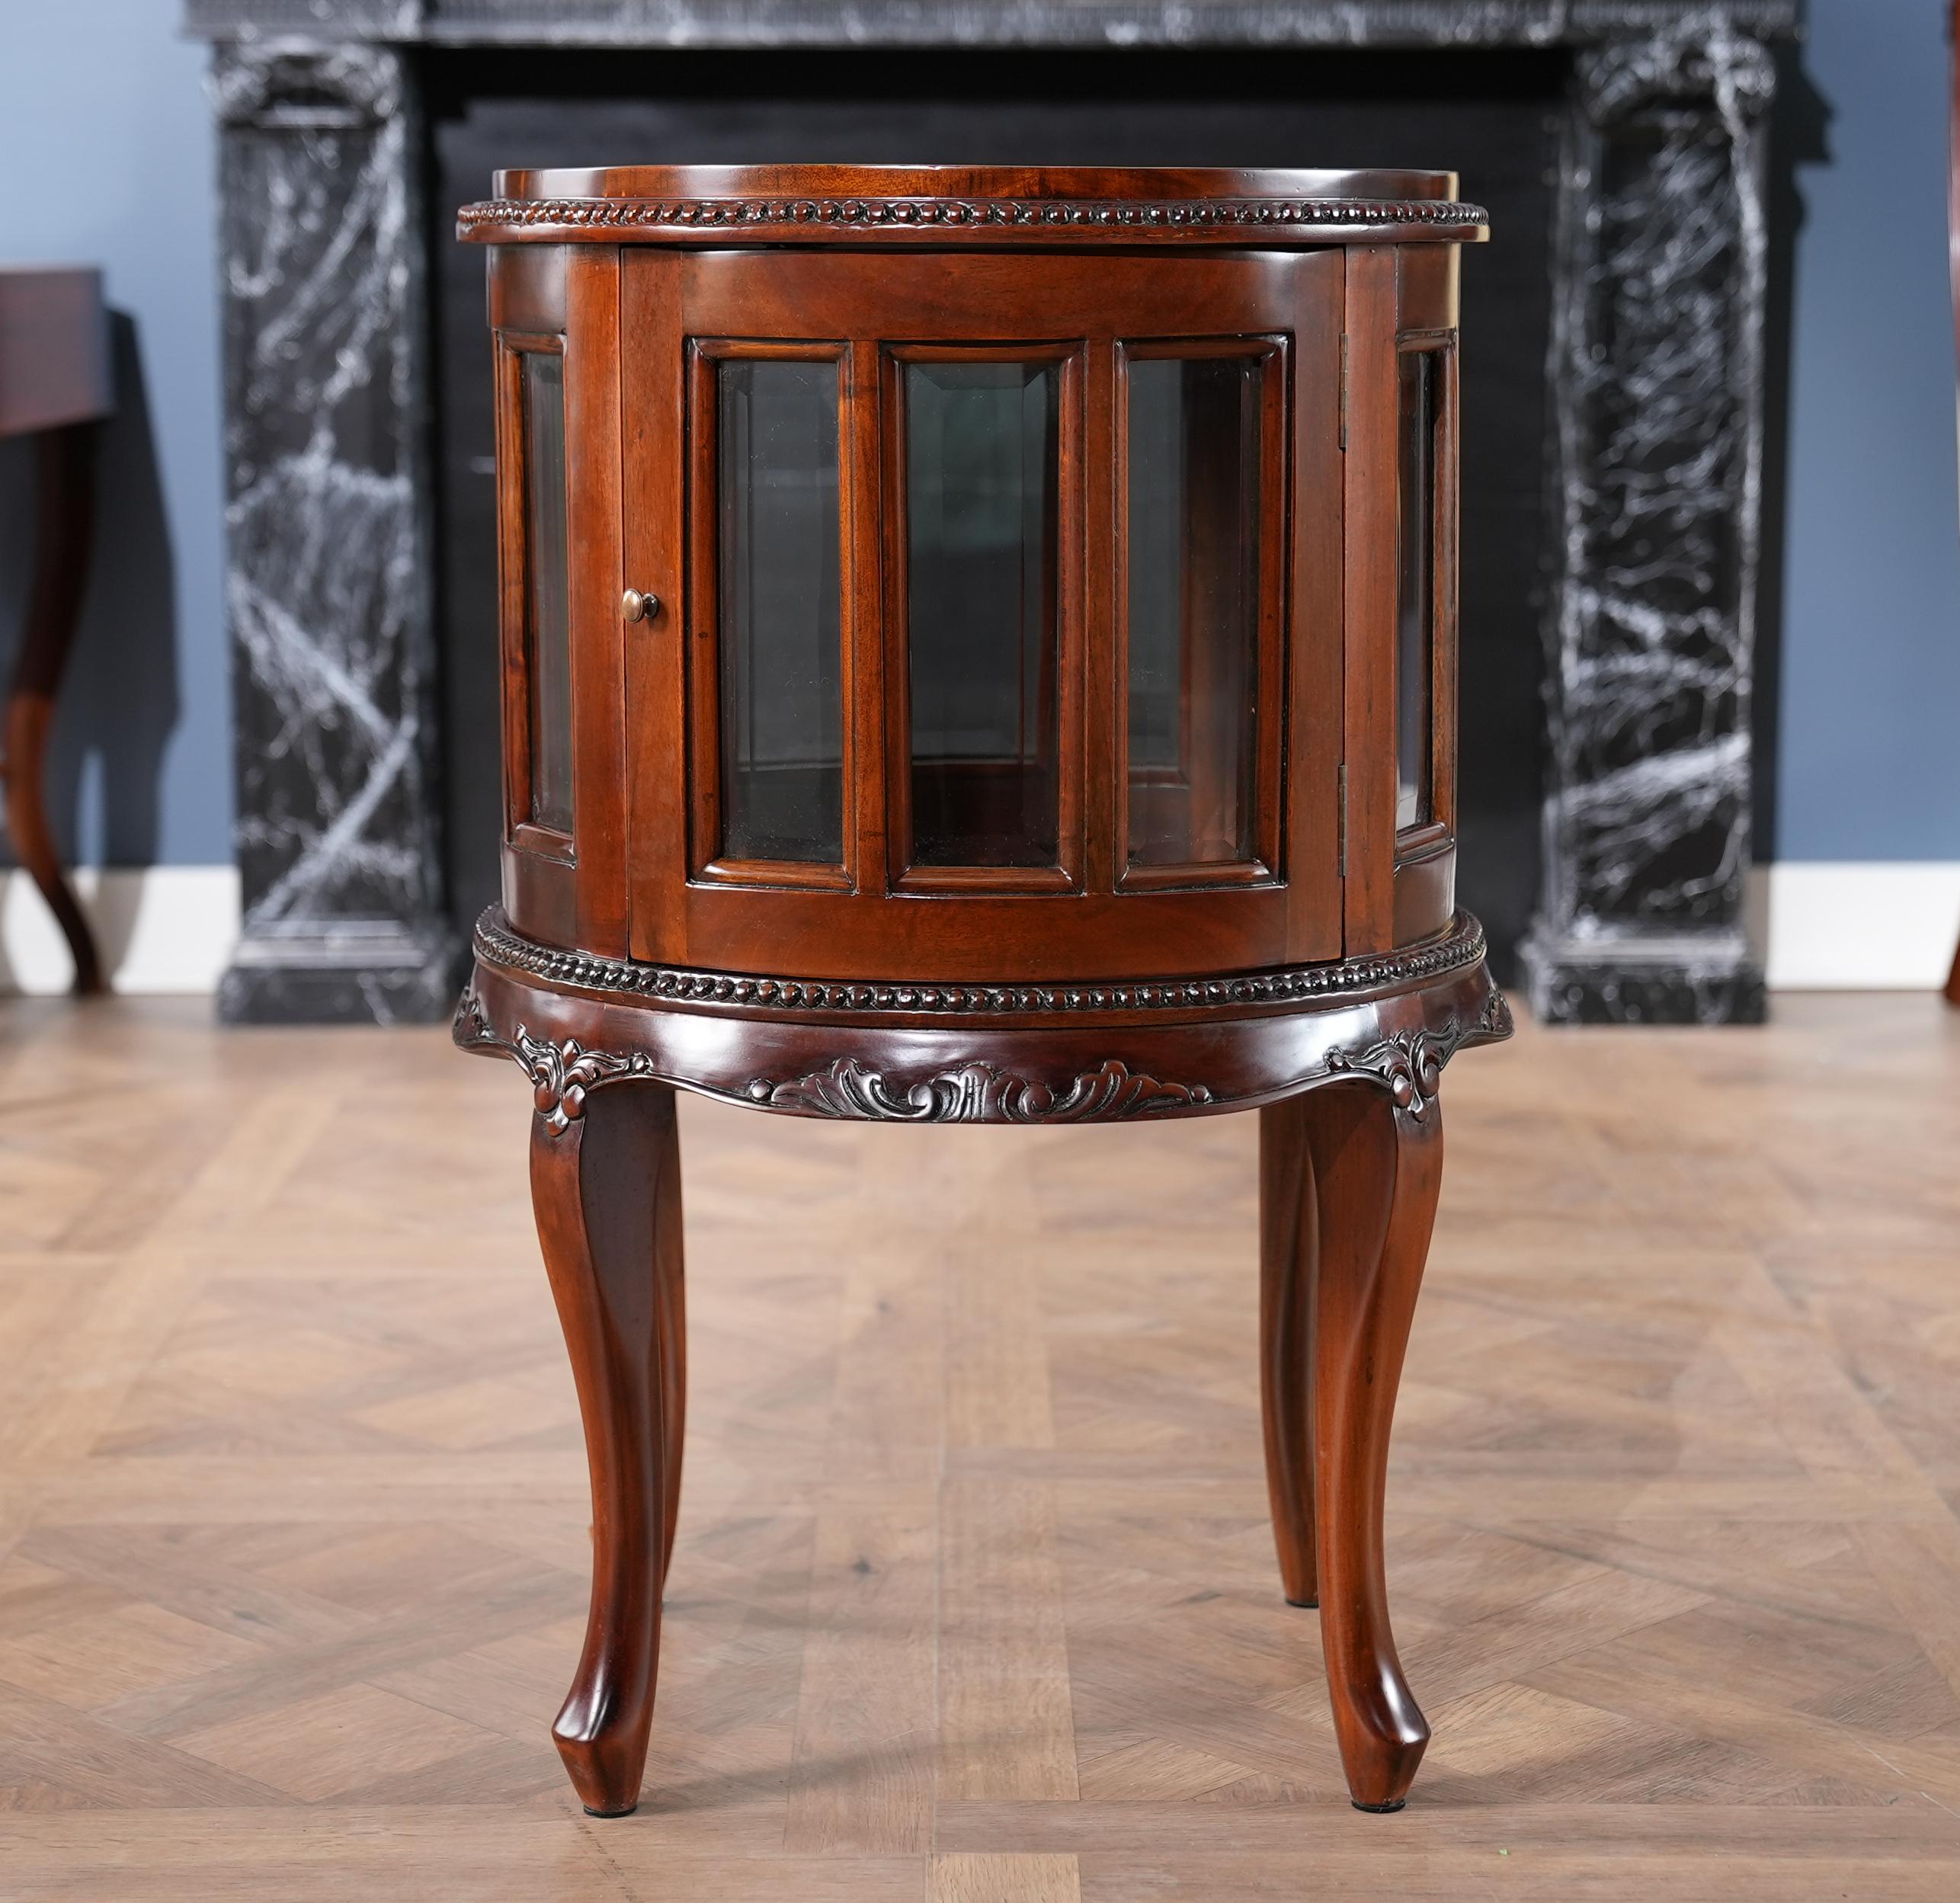 The Round Tray Top Mahogany Display Table from Niagara Furniture is an exercise in elegance. The sweeping  mahogany legs are created by hand and support the table’s finely carved skirt and glassed in display area which itself feature individual